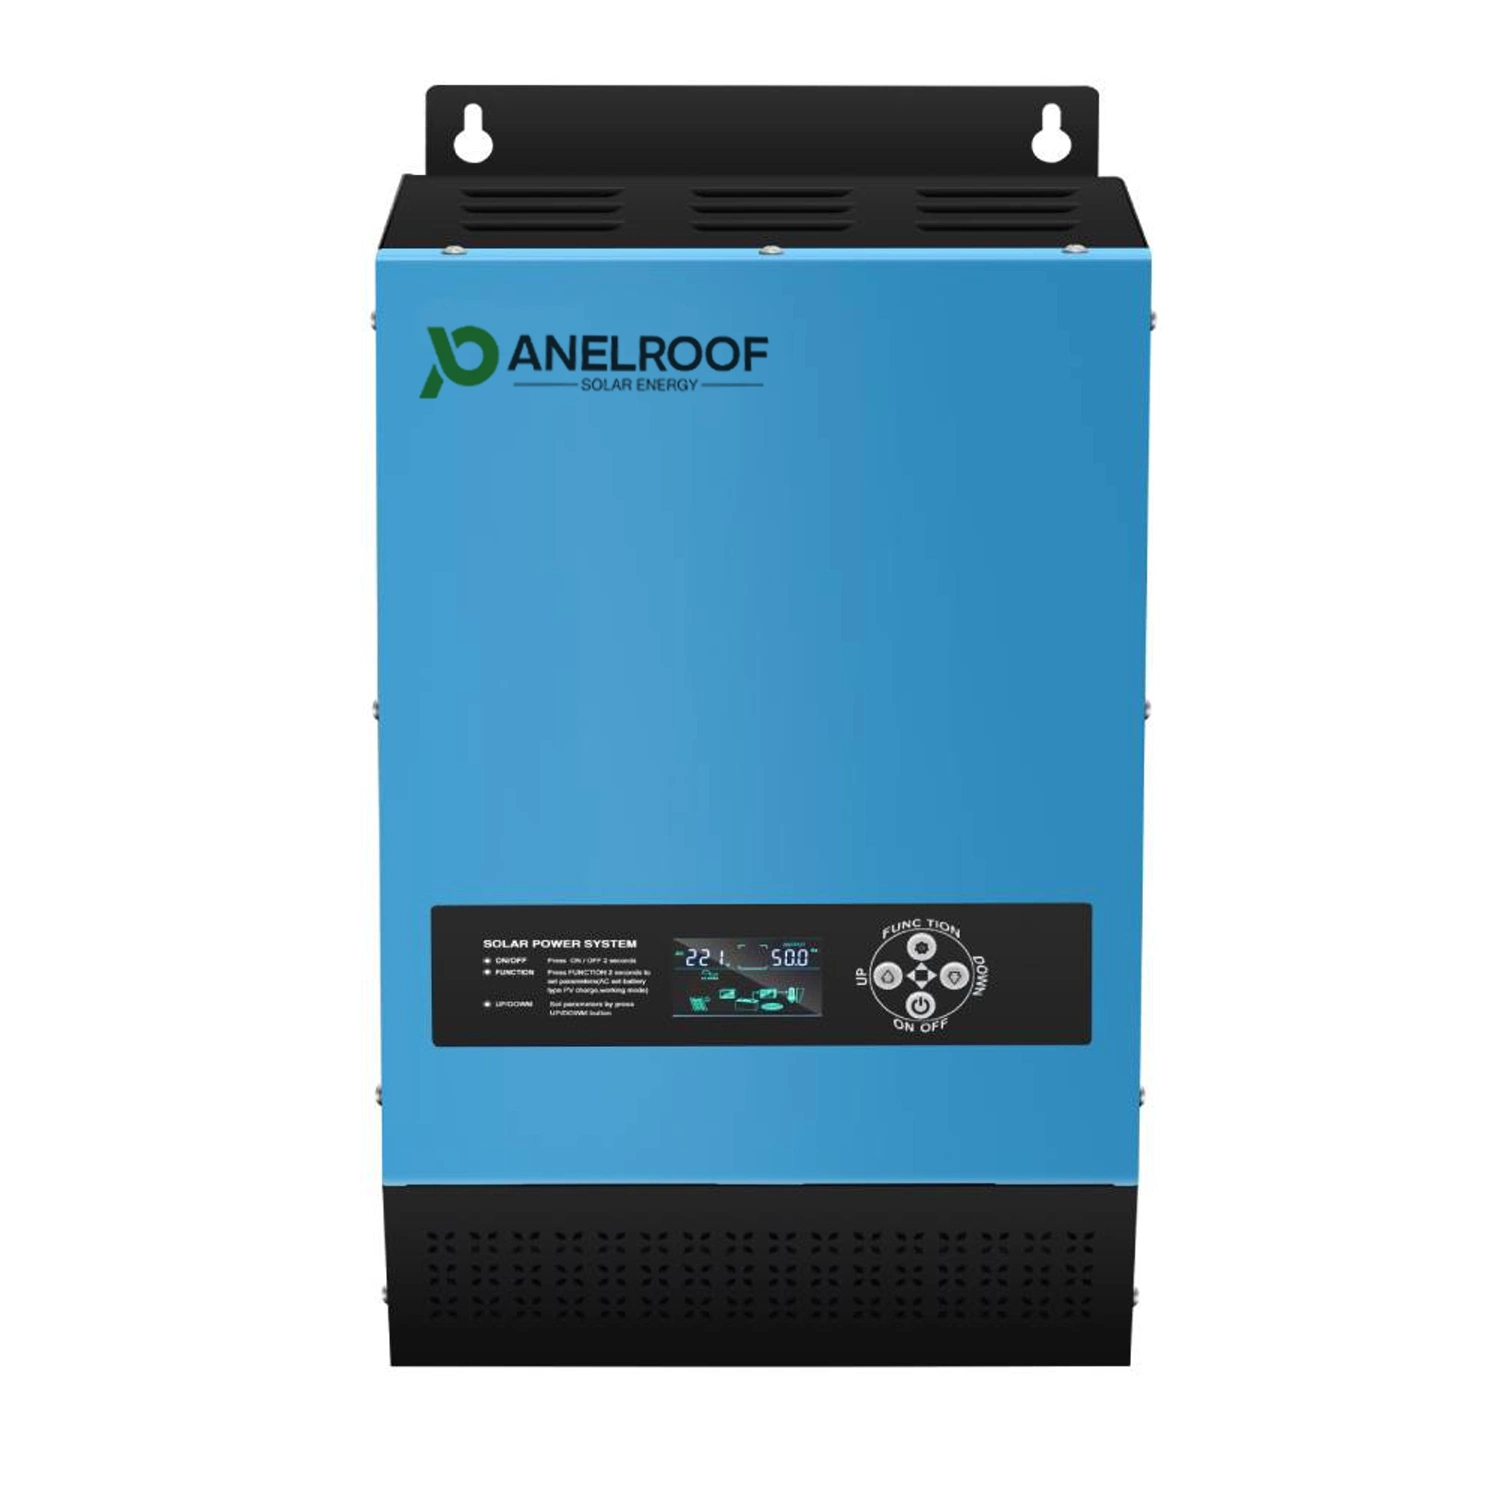 Panelroof 3kw 5kw off Grid Single Phase Photovoltaic Power system Solar Inverter